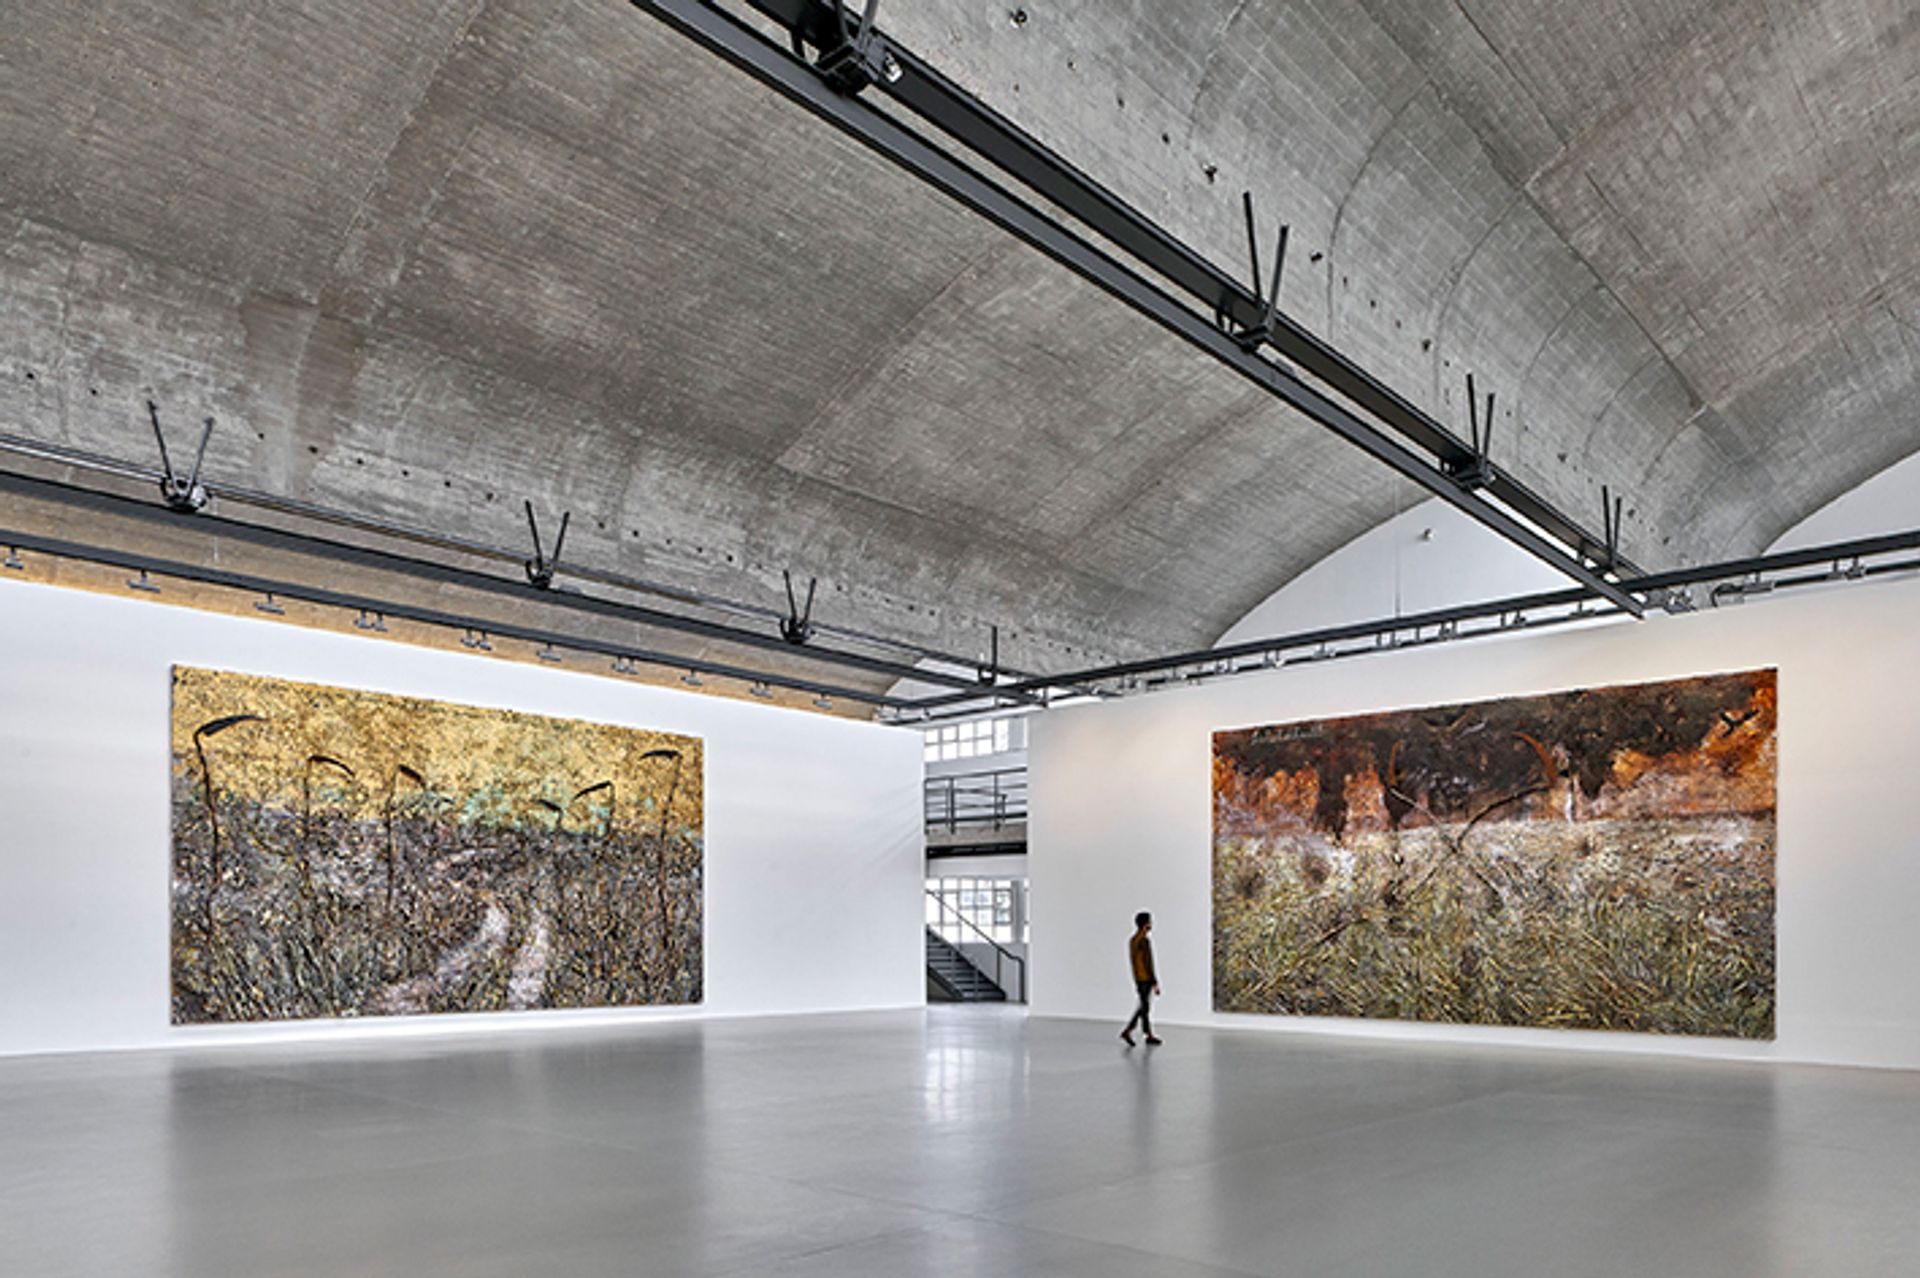 Vue de l'exposition "Field of the Cloth of Gold" d'Anselm Kiefer, Galerie Gagosian, Le Bourget, février 2021. © Anselm Kiefer. Courtesy Gagosian, Le Bourget 2021.